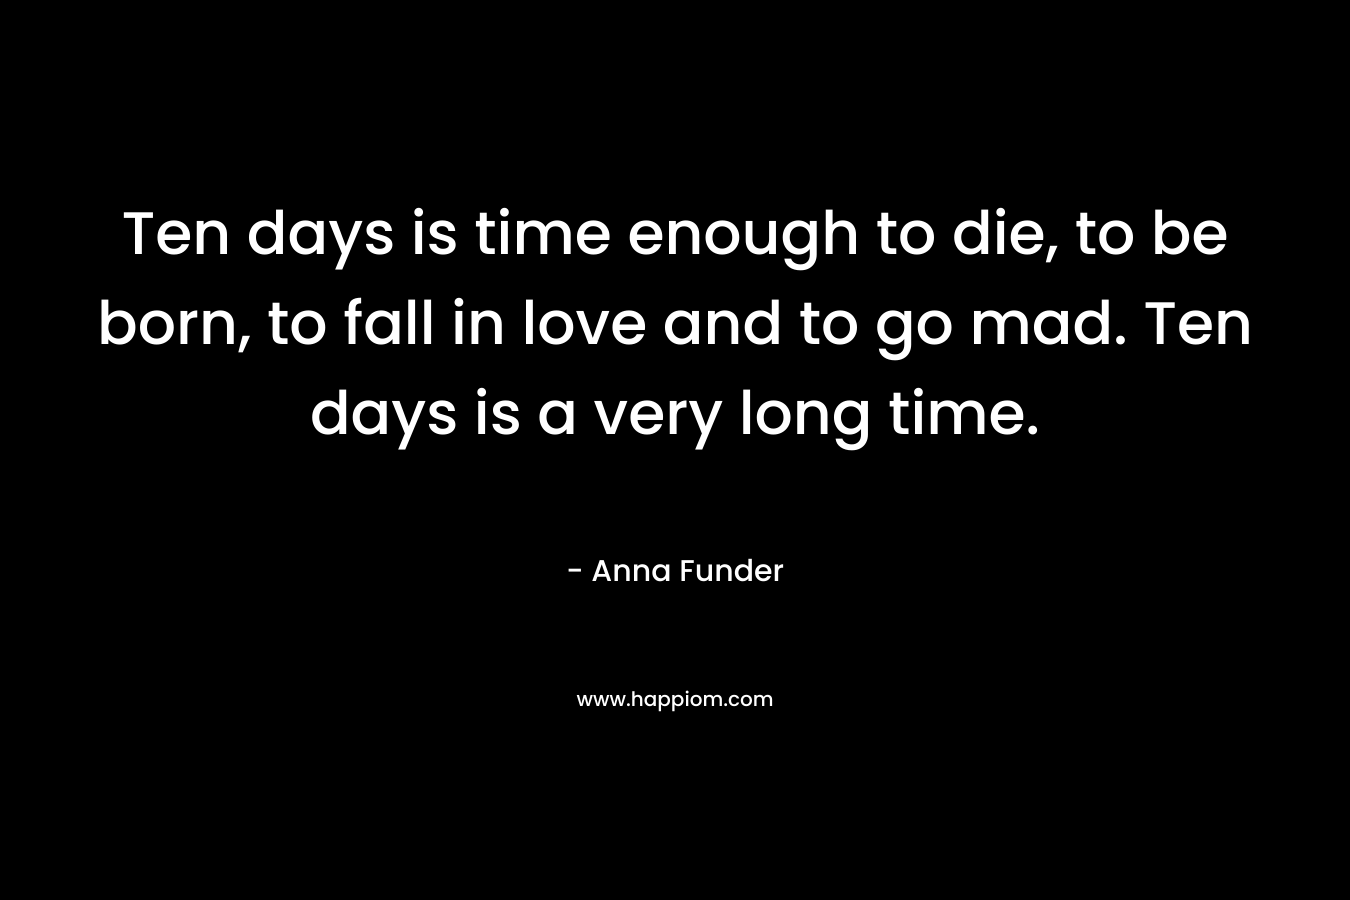 Ten days is time enough to die, to be born, to fall in love and to go mad. Ten days is a very long time. – Anna Funder